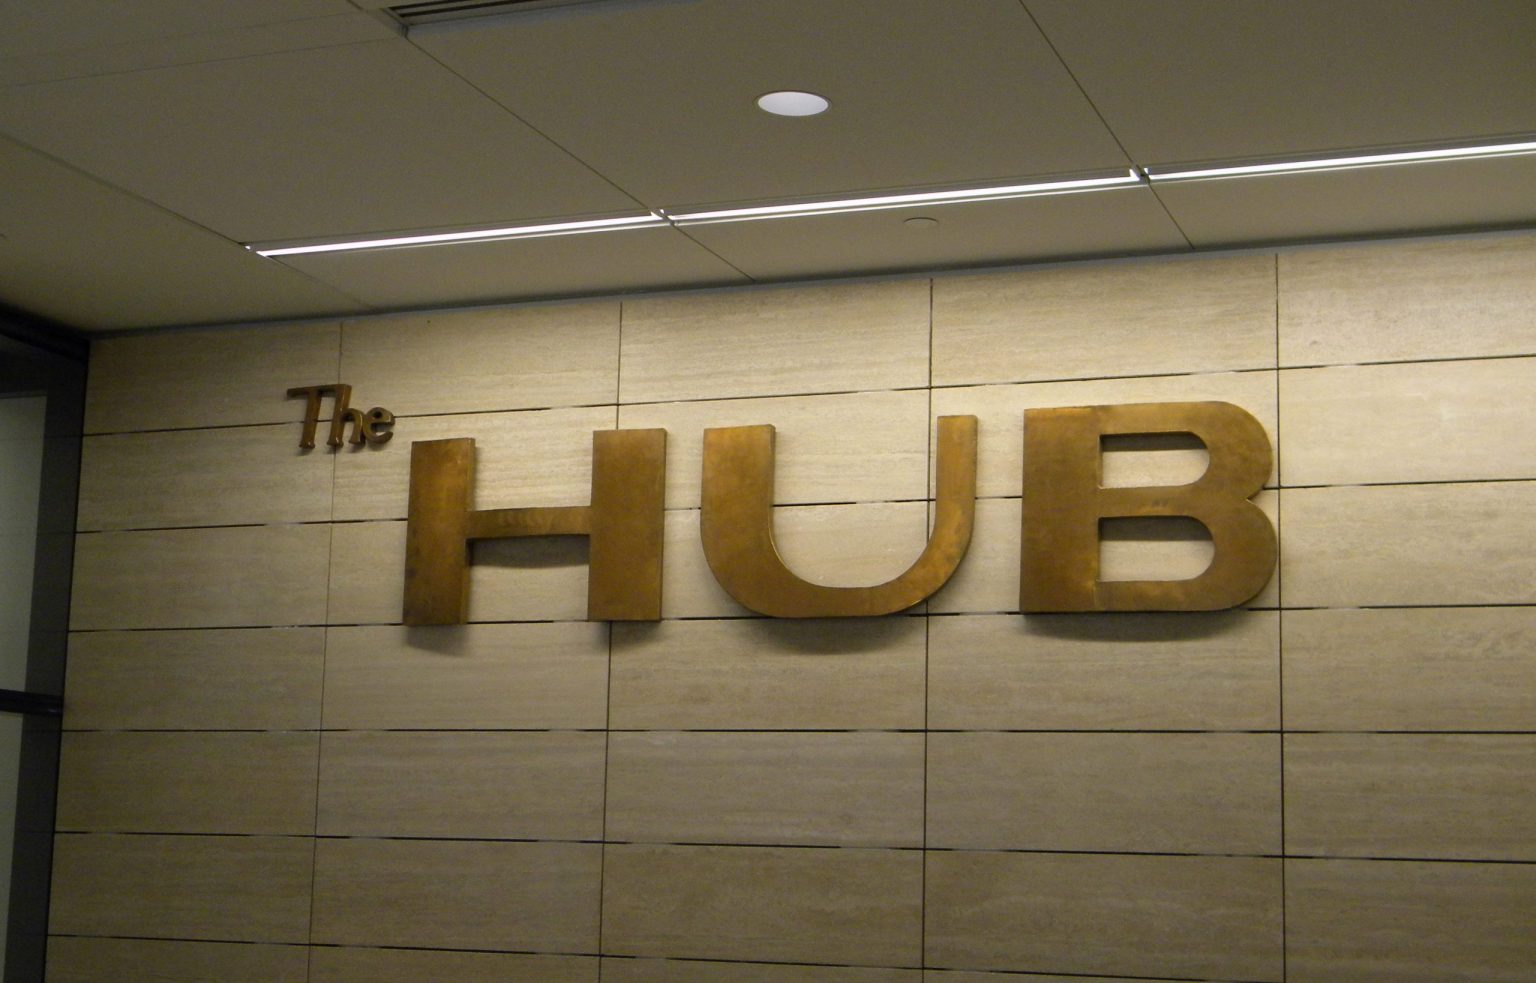 Services | The HUB